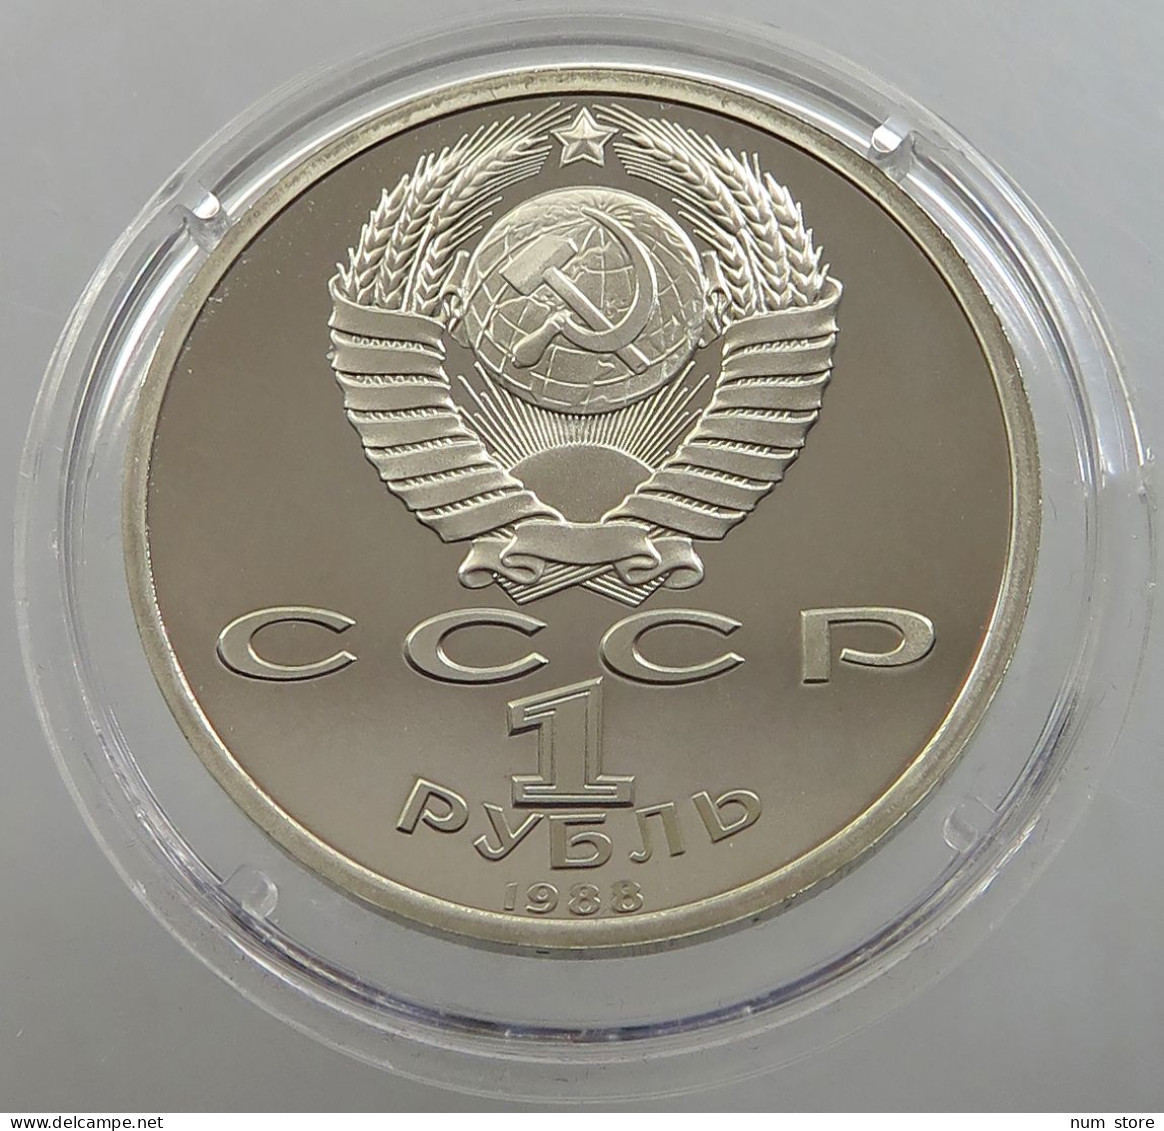 RUSSIA USSR 1 ROUBLE 1988 GORKI PROOF #sm14 0501 - Russland